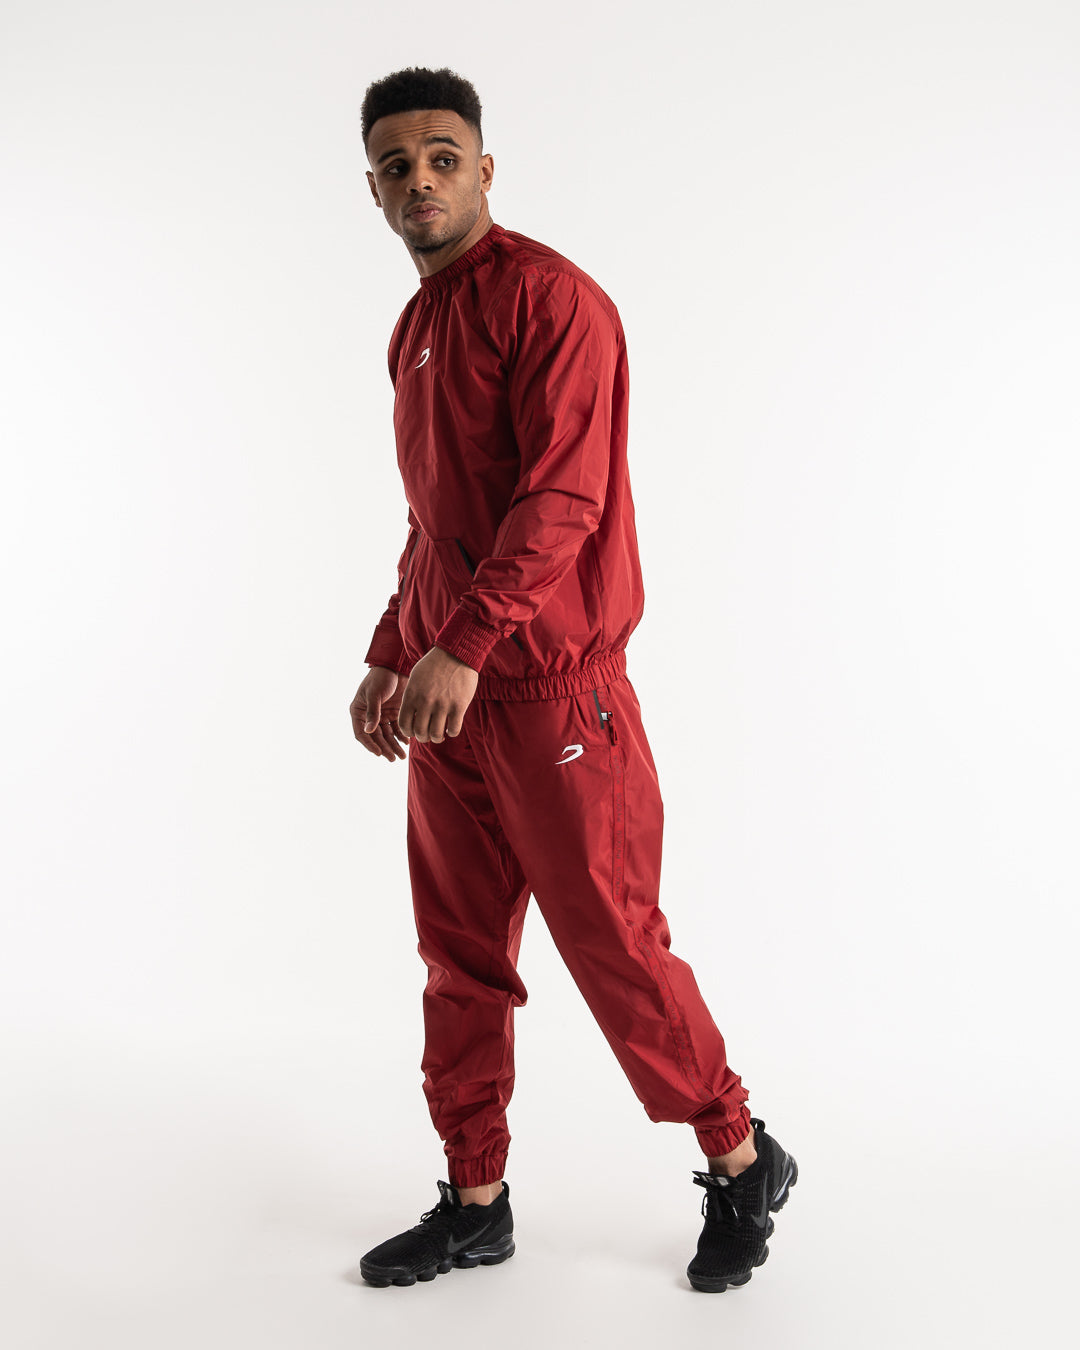 Credential Pickering fascisme Hagler Sauna Suit 2.0 - Red | Essential Weight Loss Tool | BOXRAW